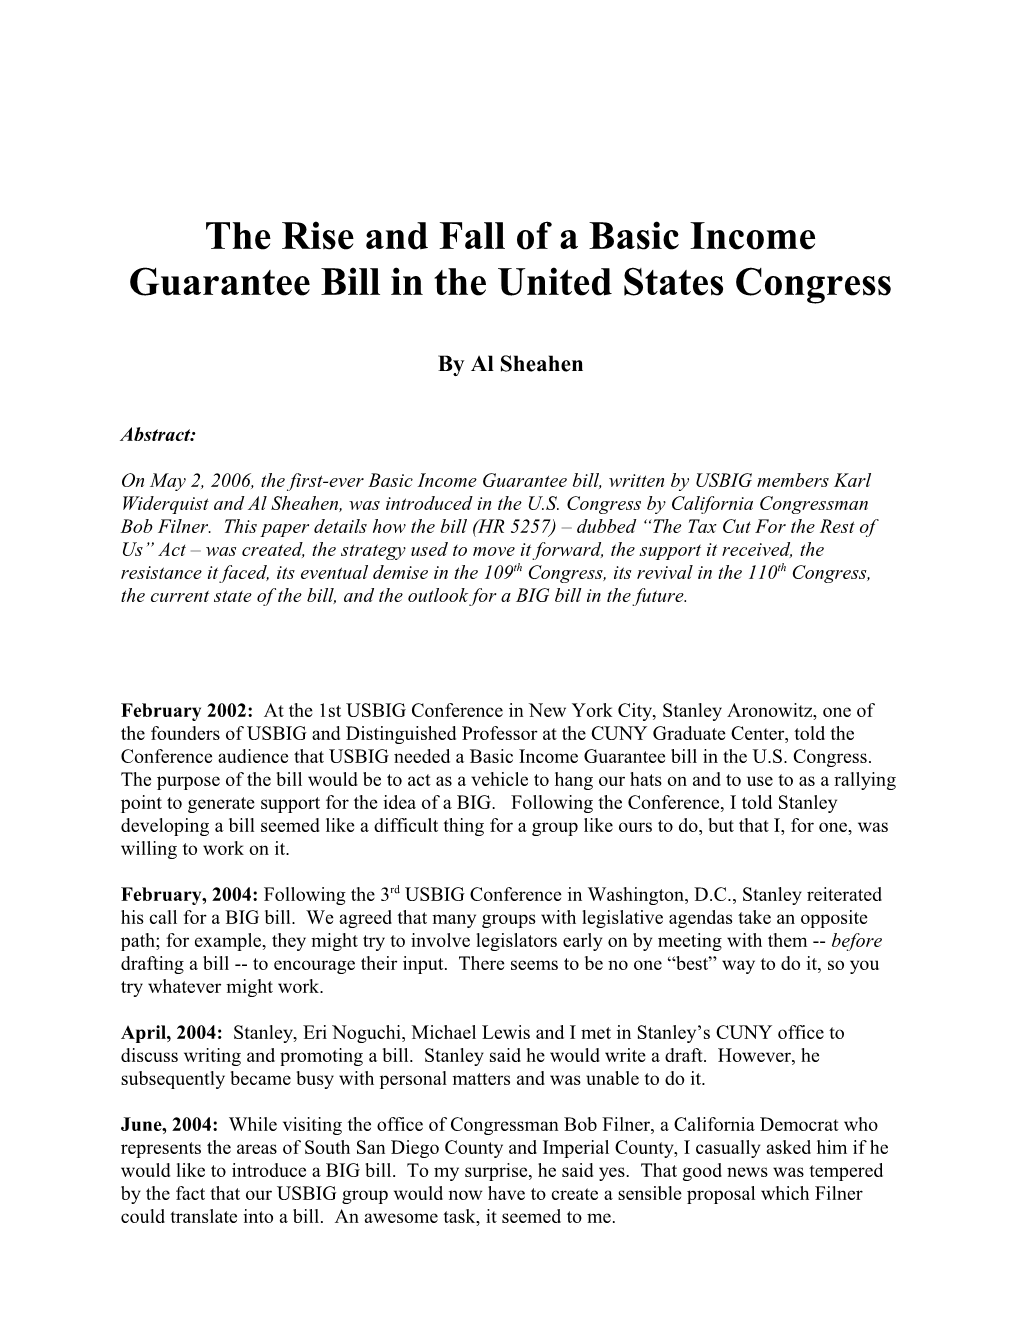 The Rise and Fall of a Basic Income Guarantee Bill in the United States Congress